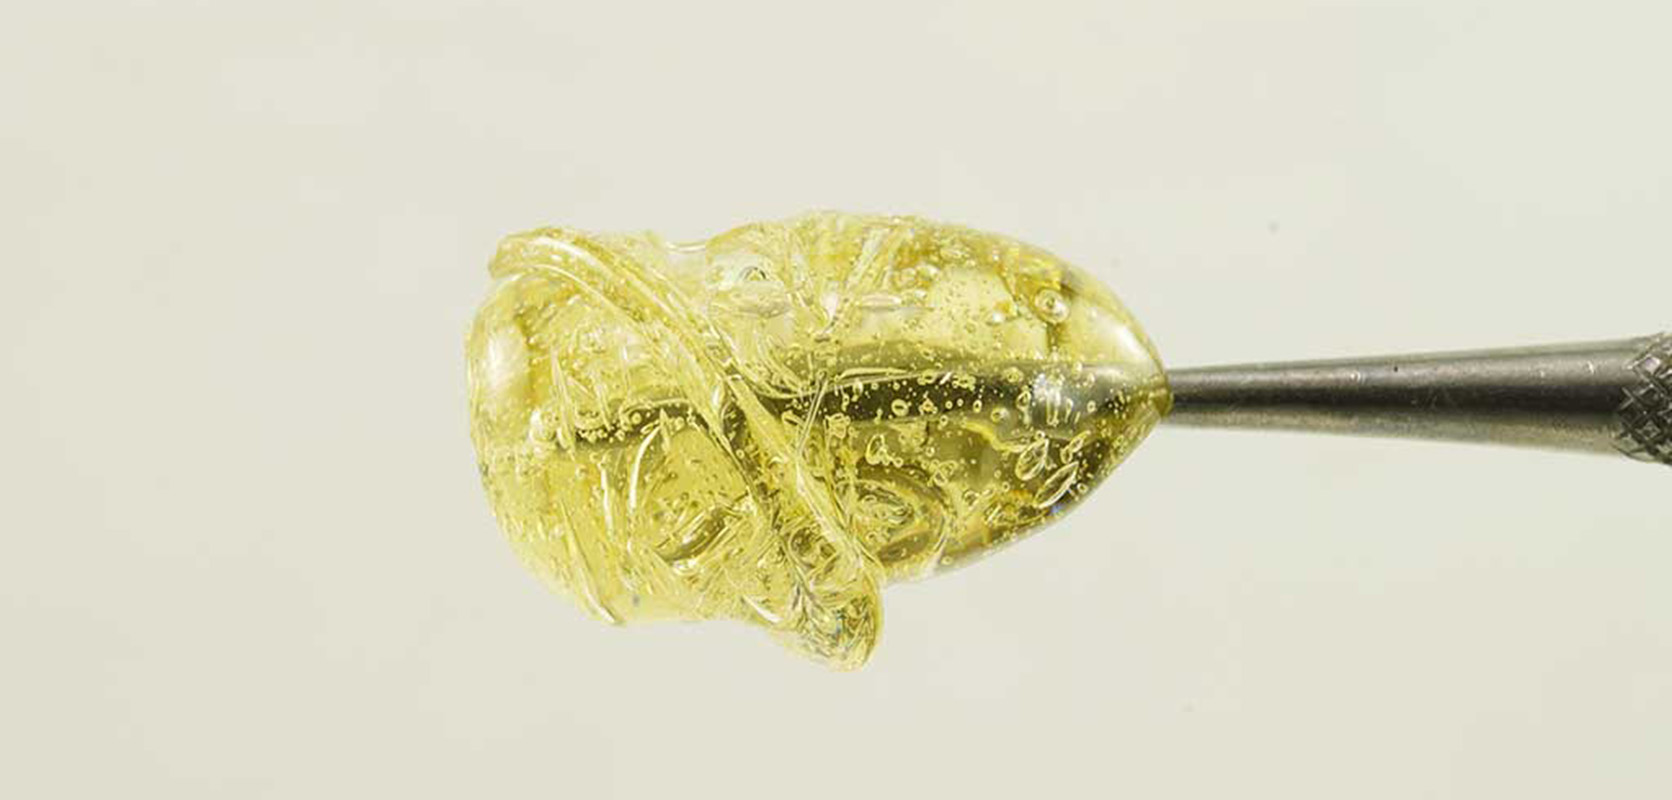 THC Distillate cannabis concentrate from Low Price Bud online dispensary in Canada.